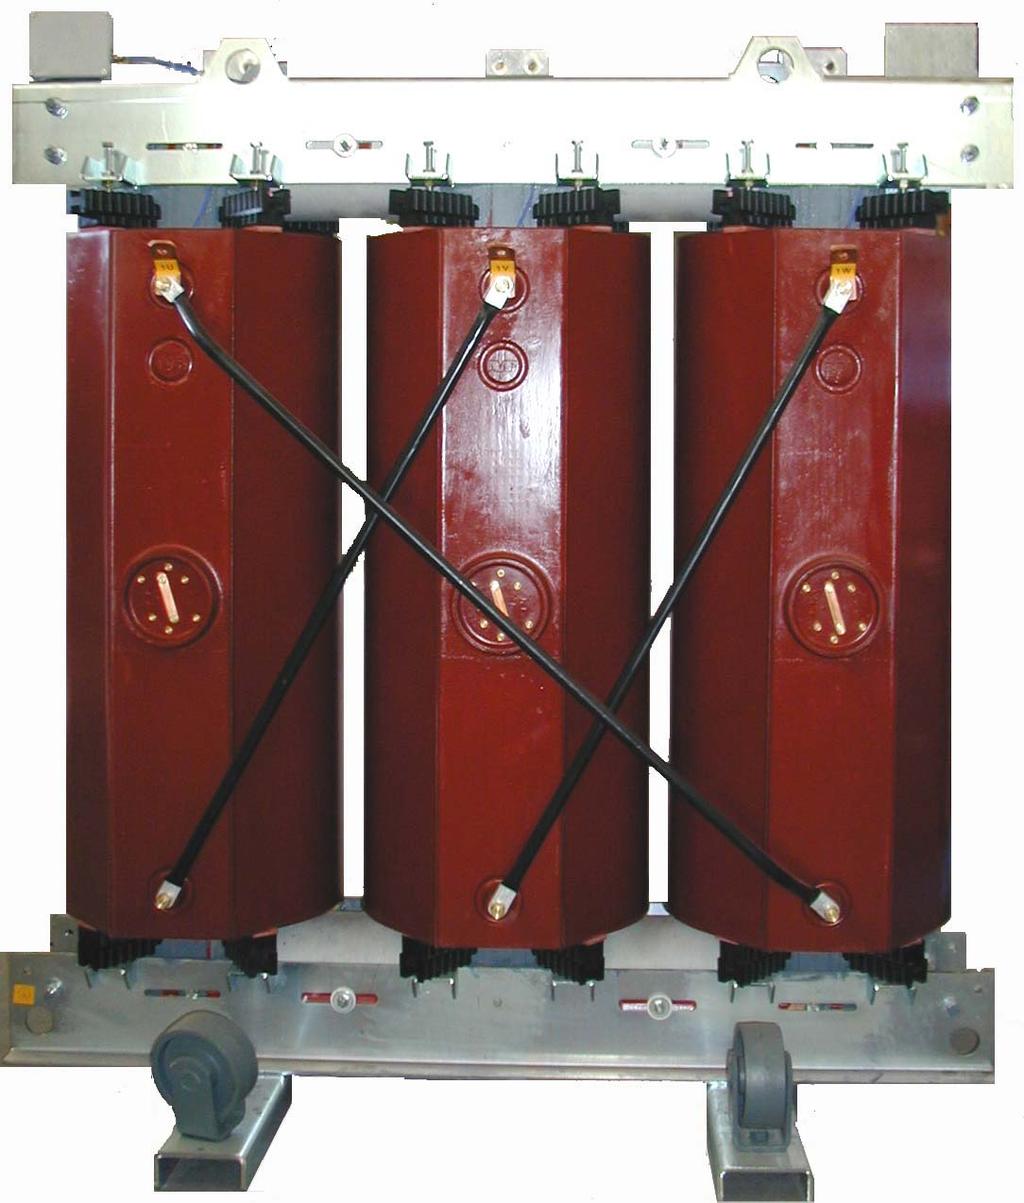 TRANSFORMATORI INGLOBATI CAST-RESIN TRANSFORMERS CA STANDARD NORMS CEI EN 60076 PRODUCTION RANGE FROM 25 UP TO 15000 kva INSULATION CLASS